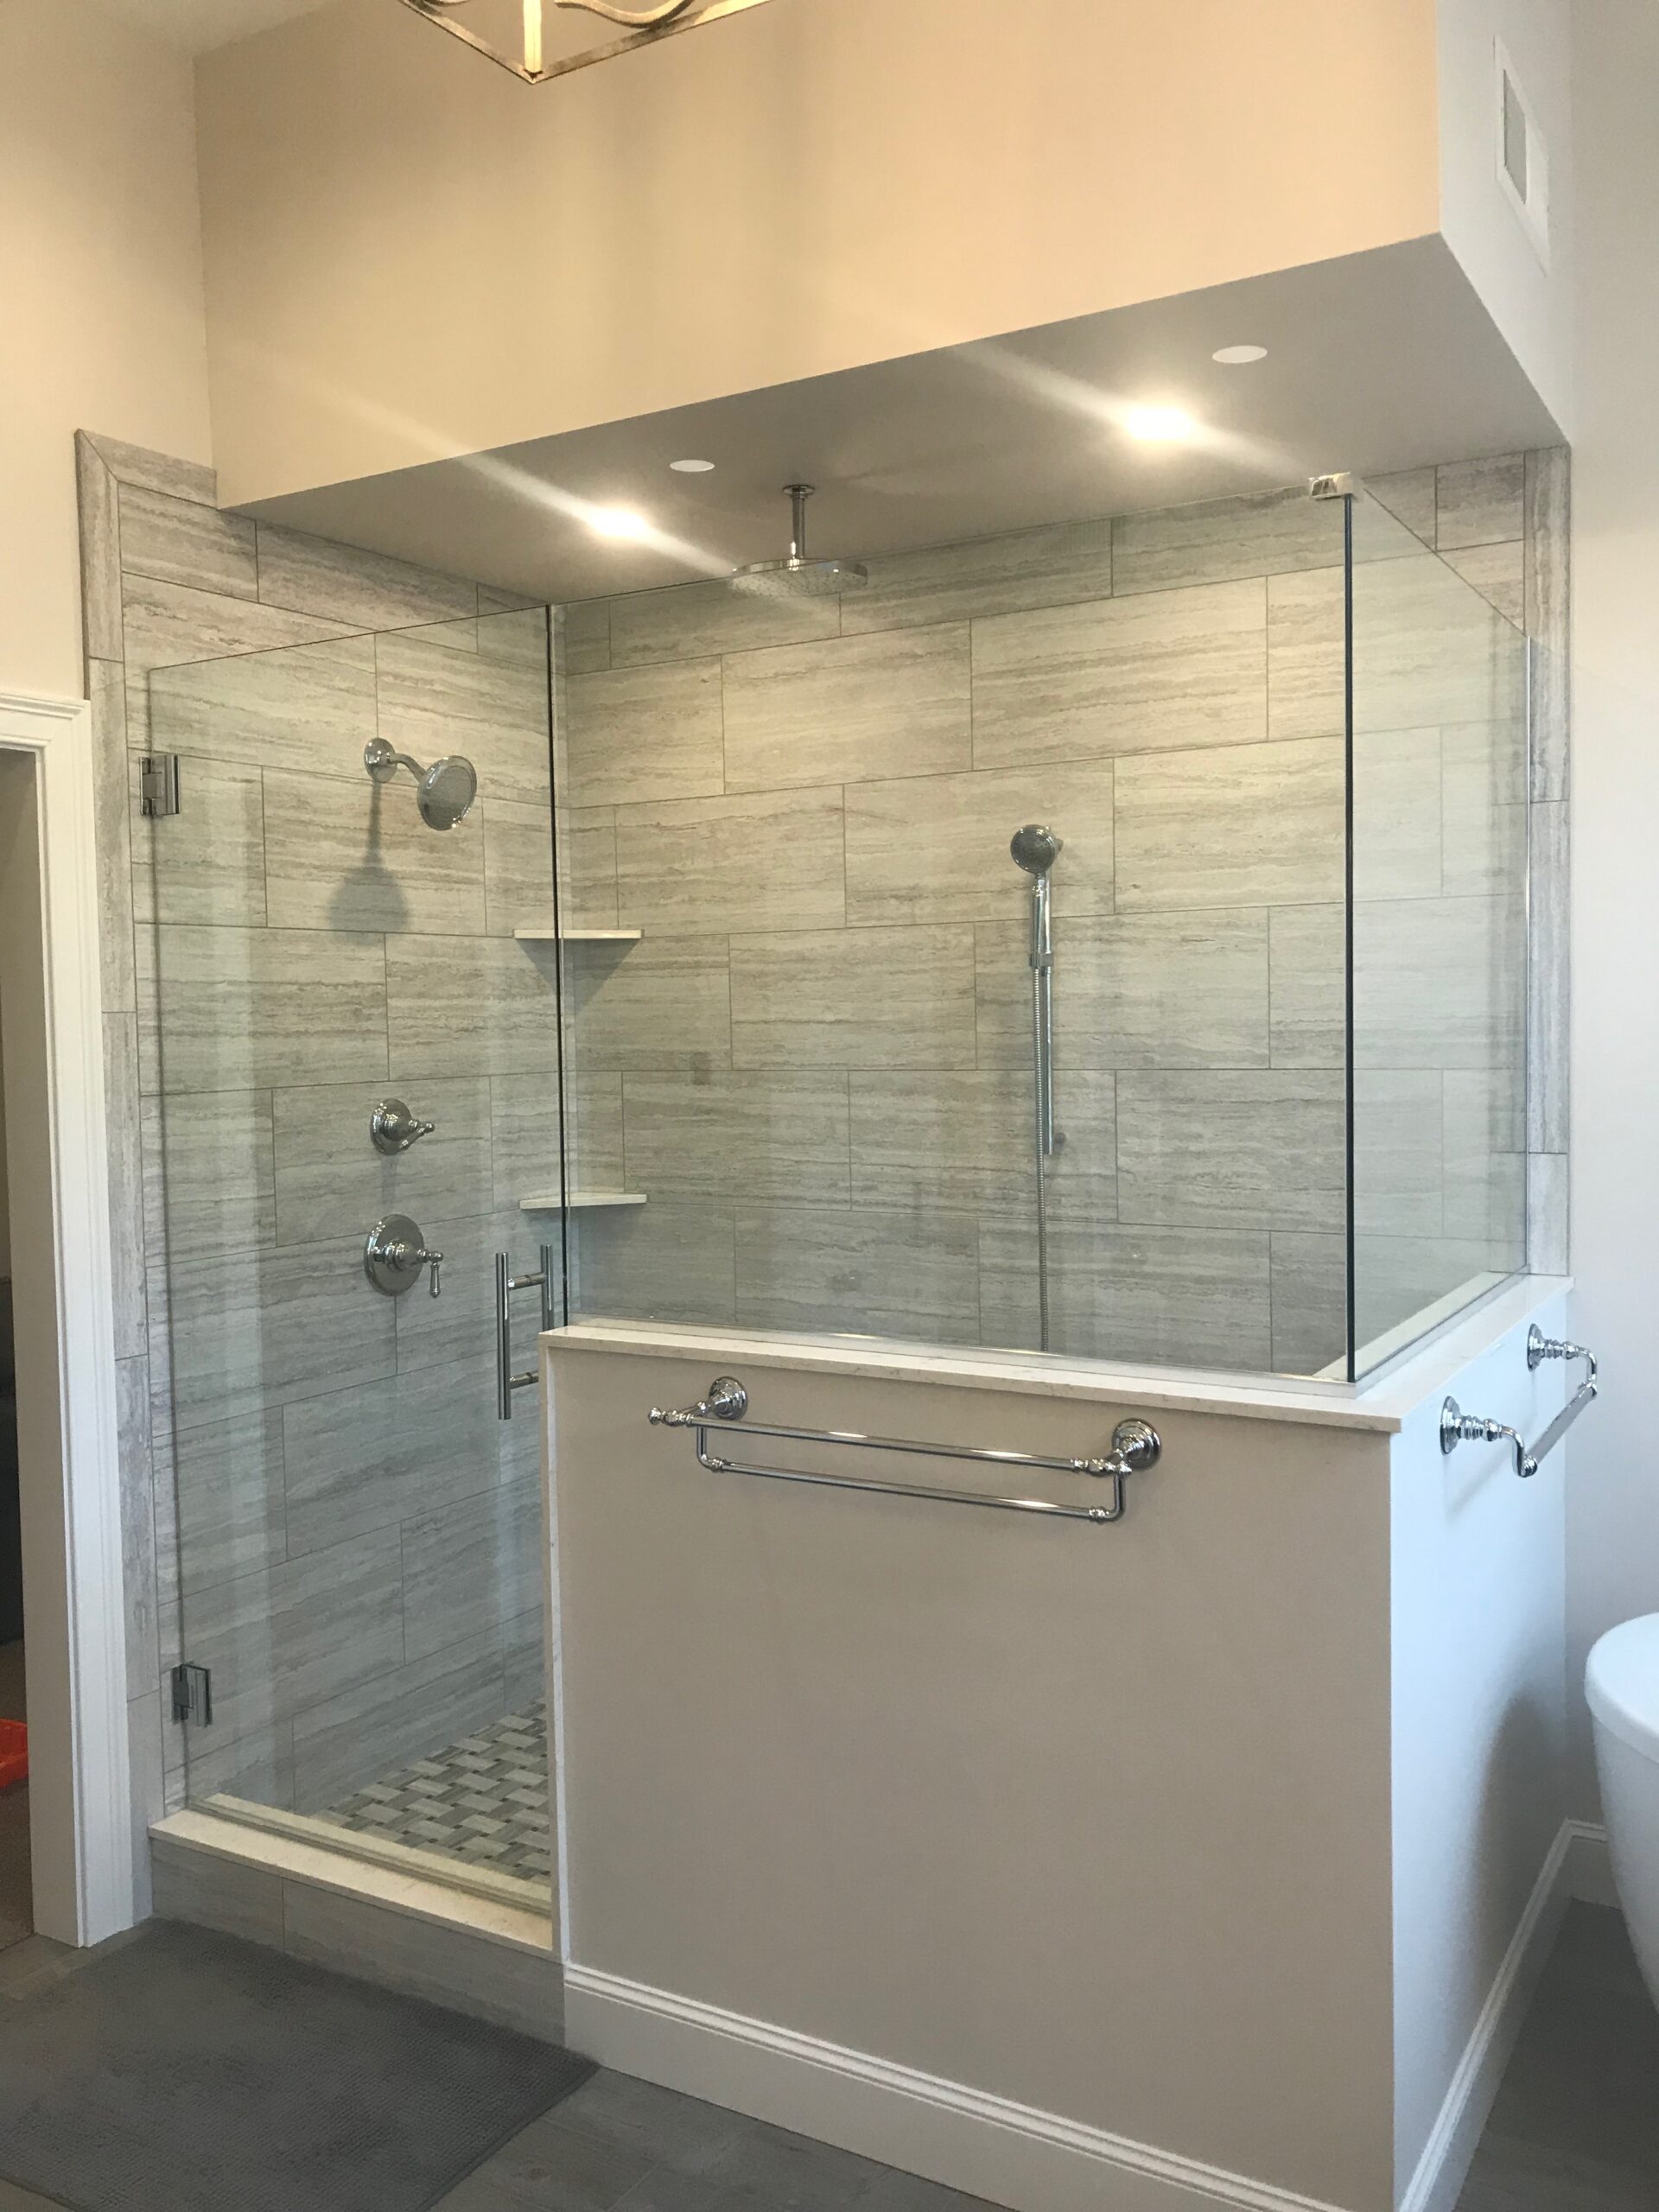 Bathroom Standup Shower with Glass Walls and Tile